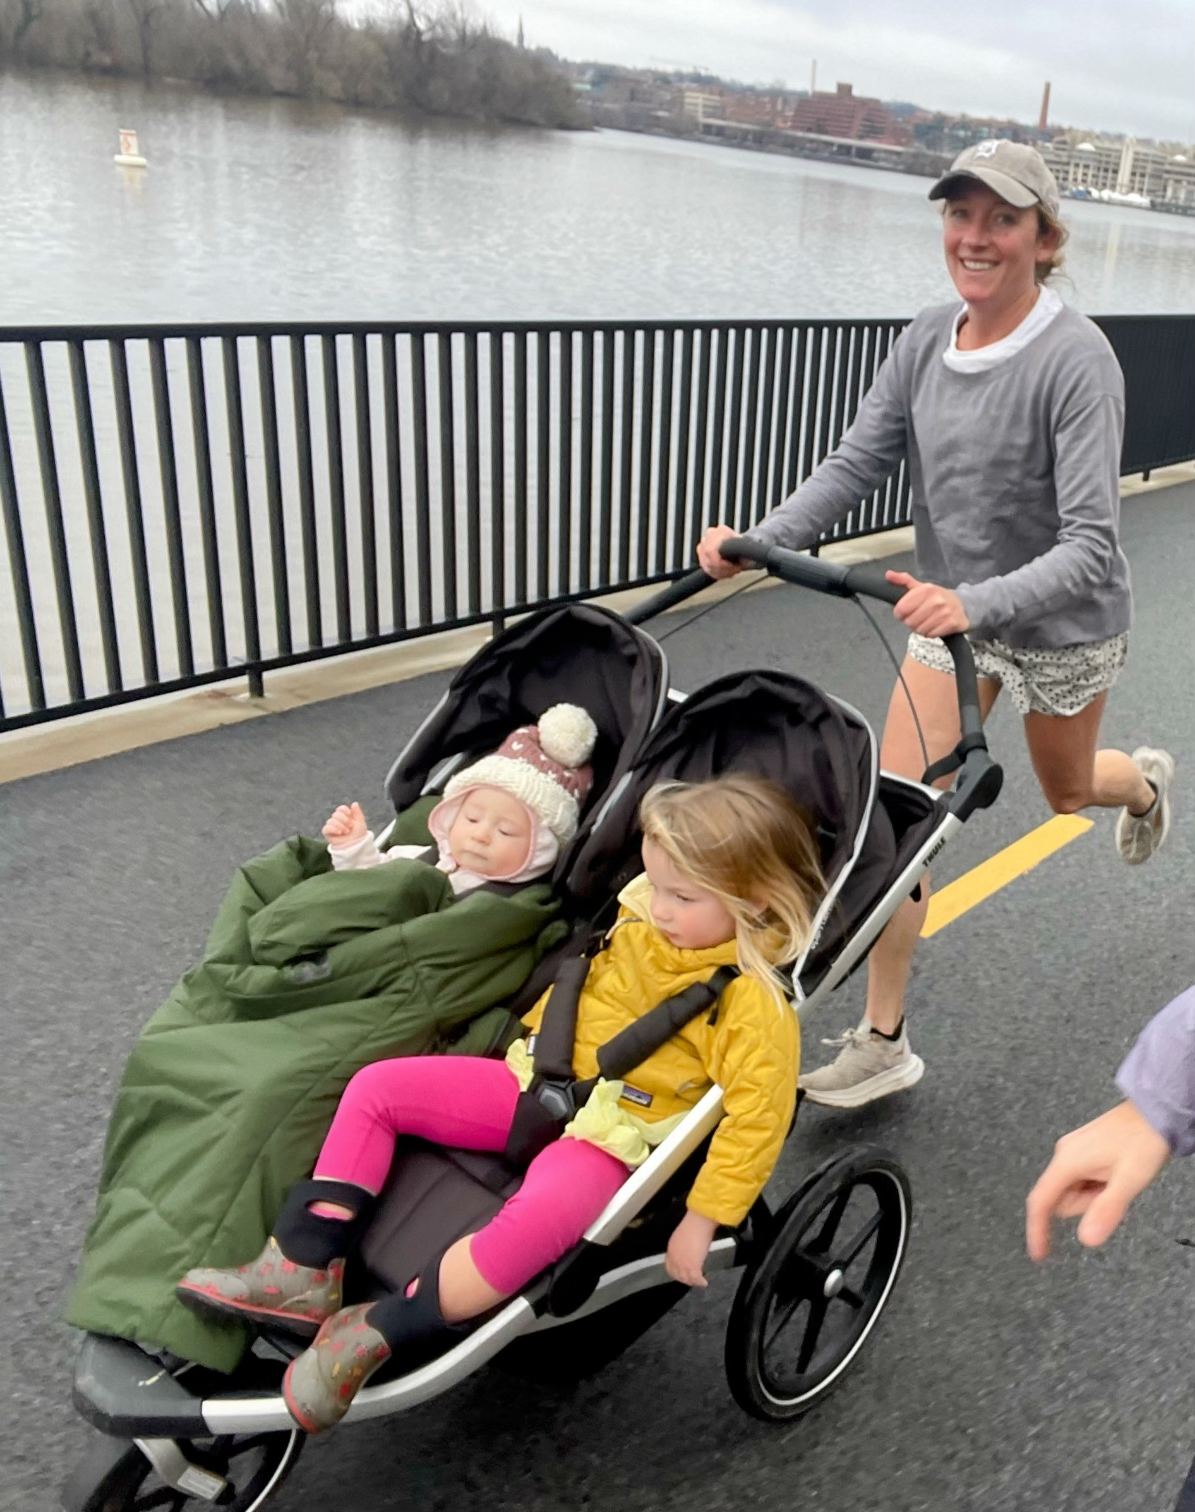 Detroit Free Press marathon entrant Jessie Stewart, 39, runs while pushing a stroller with 3-year-old daughter Avi Mae’s hair flying as son Jack, 1, snoozes during a recent workout near their home in Oakland, California.